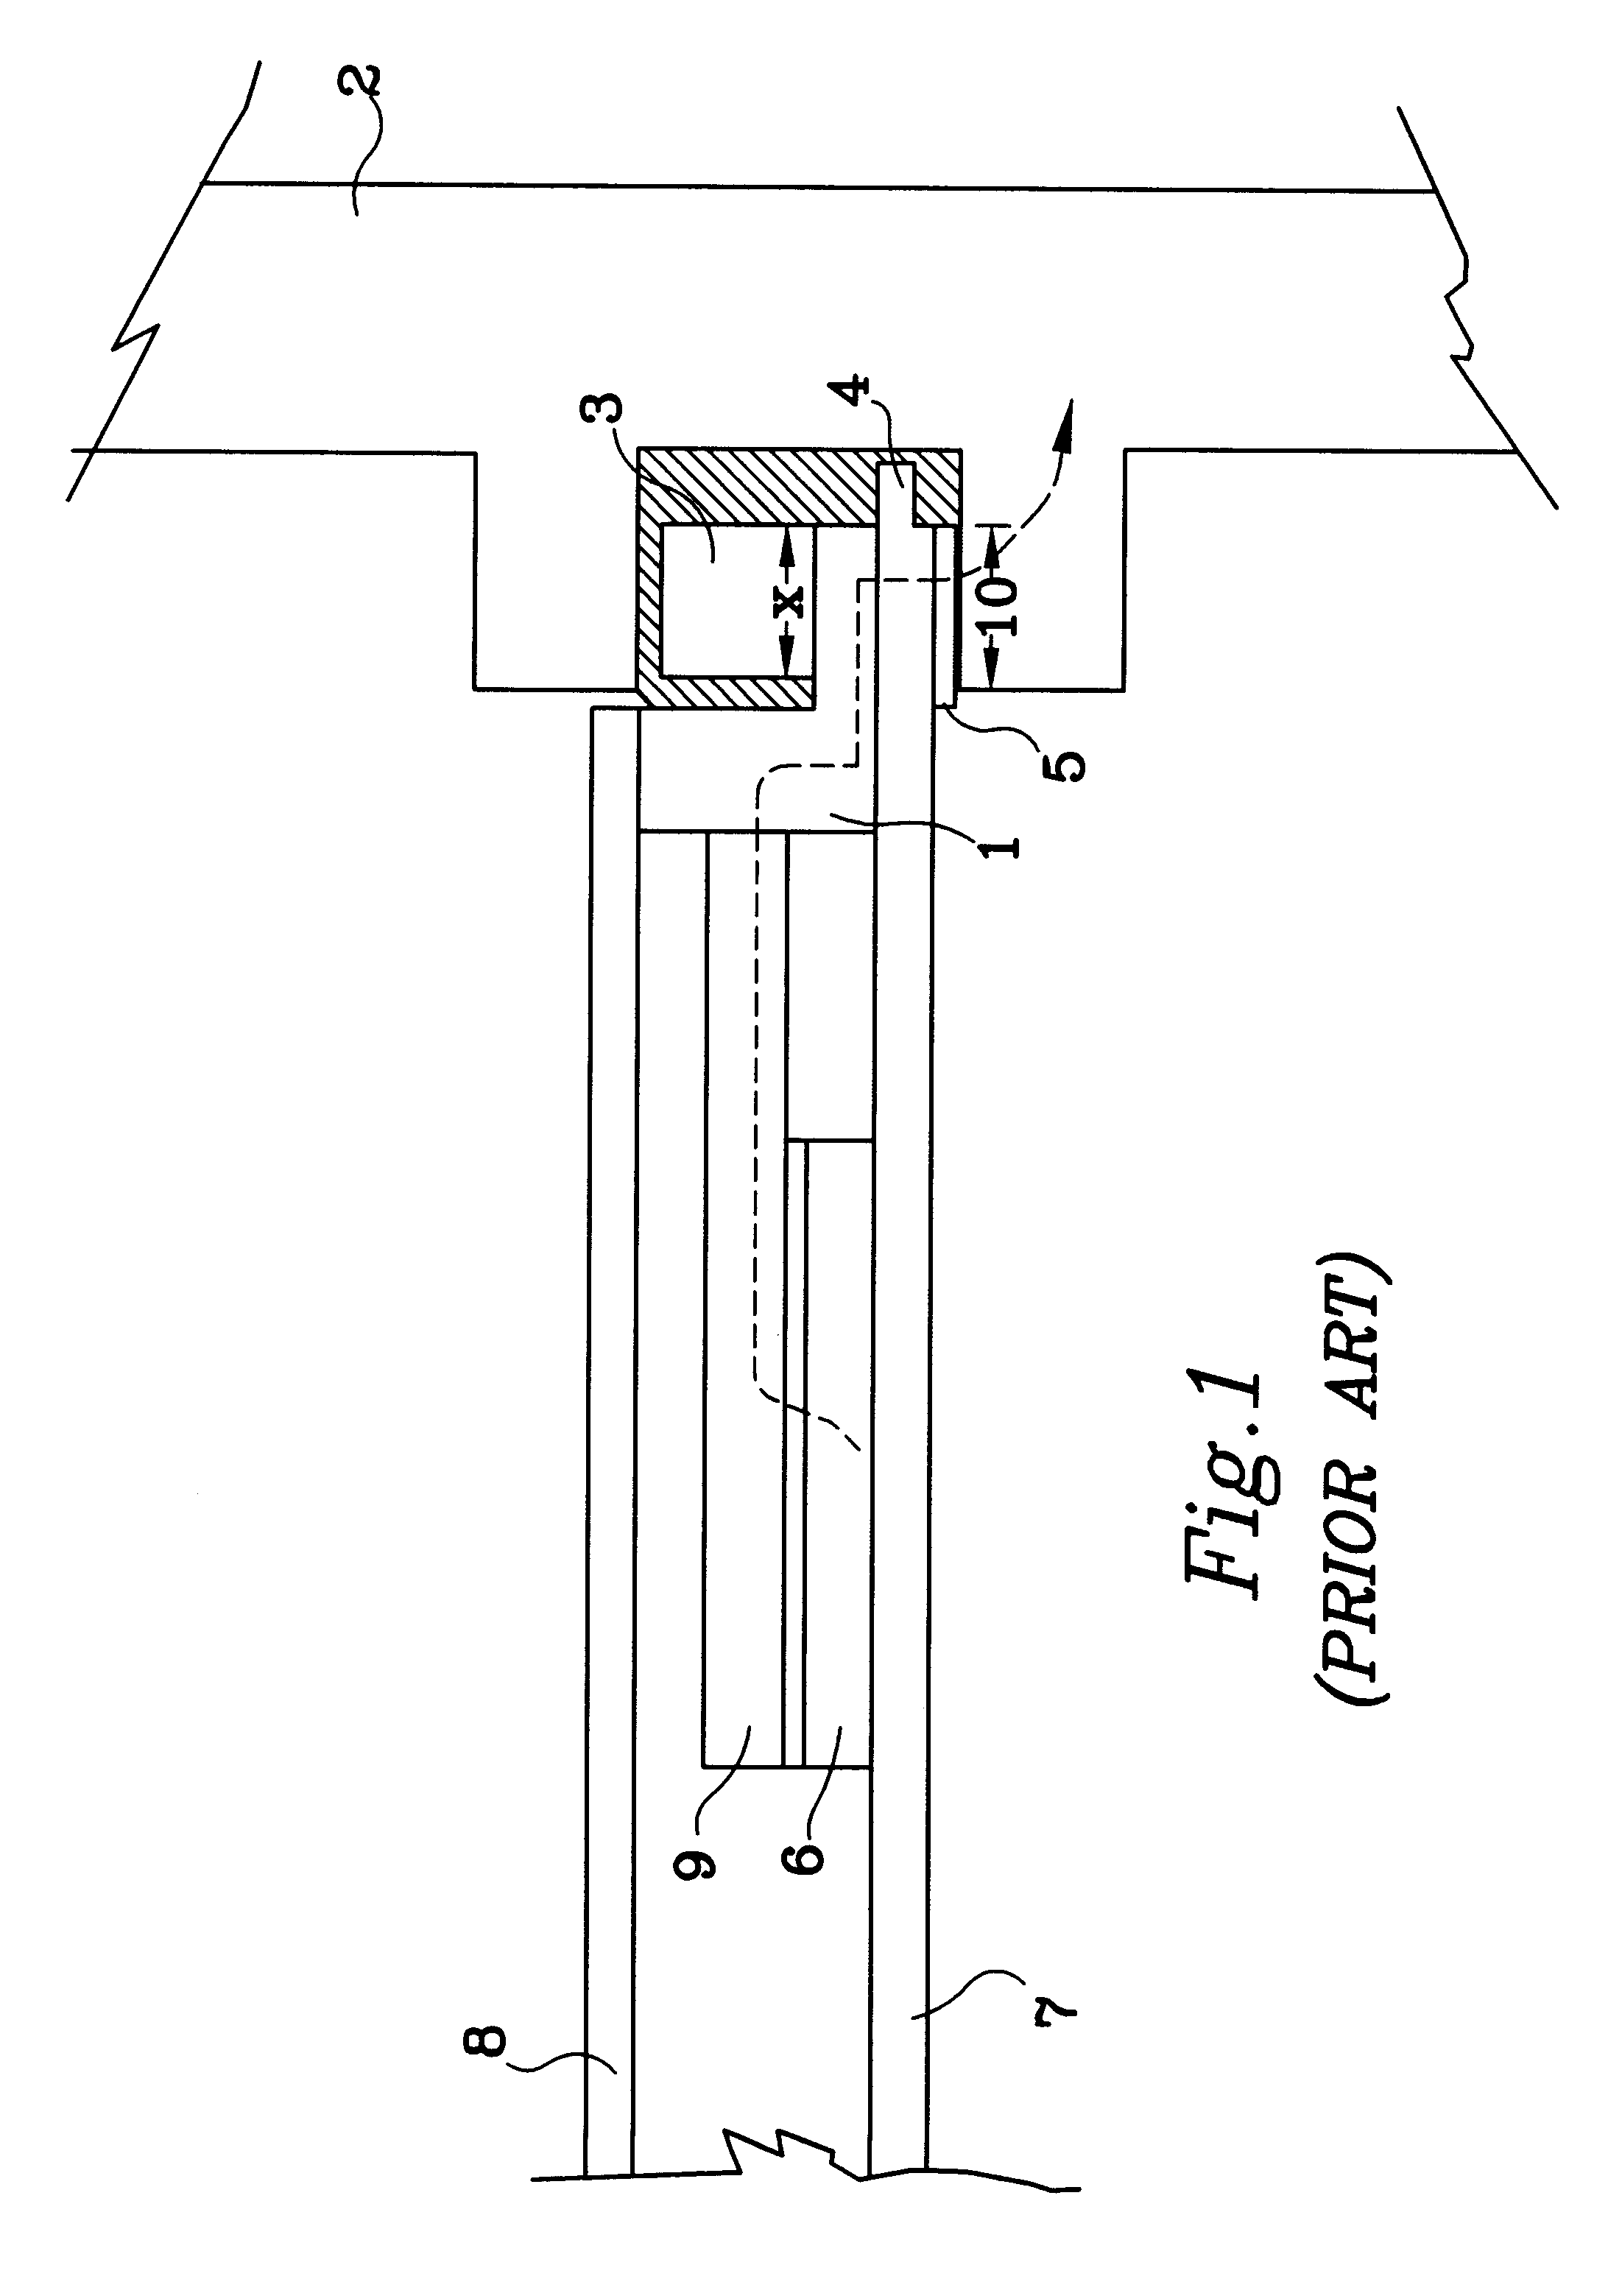 Adapter kit to allow extended width wedgelock for use in a circuit card module